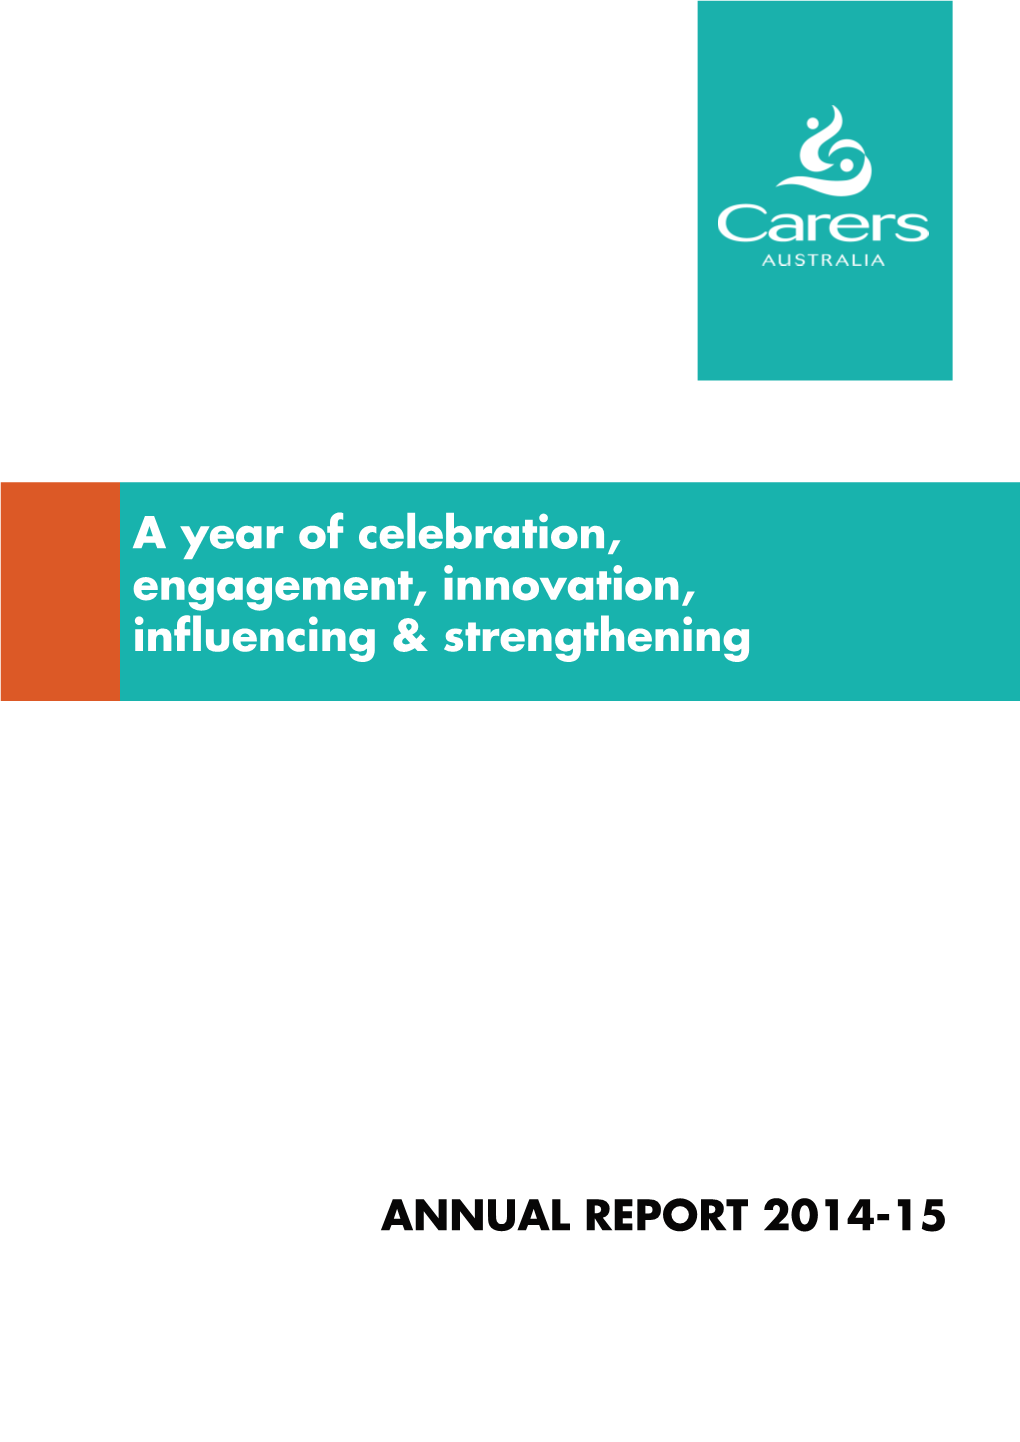 A Year of Celebration, Engagement, Innovation, Influencing & Strengthening